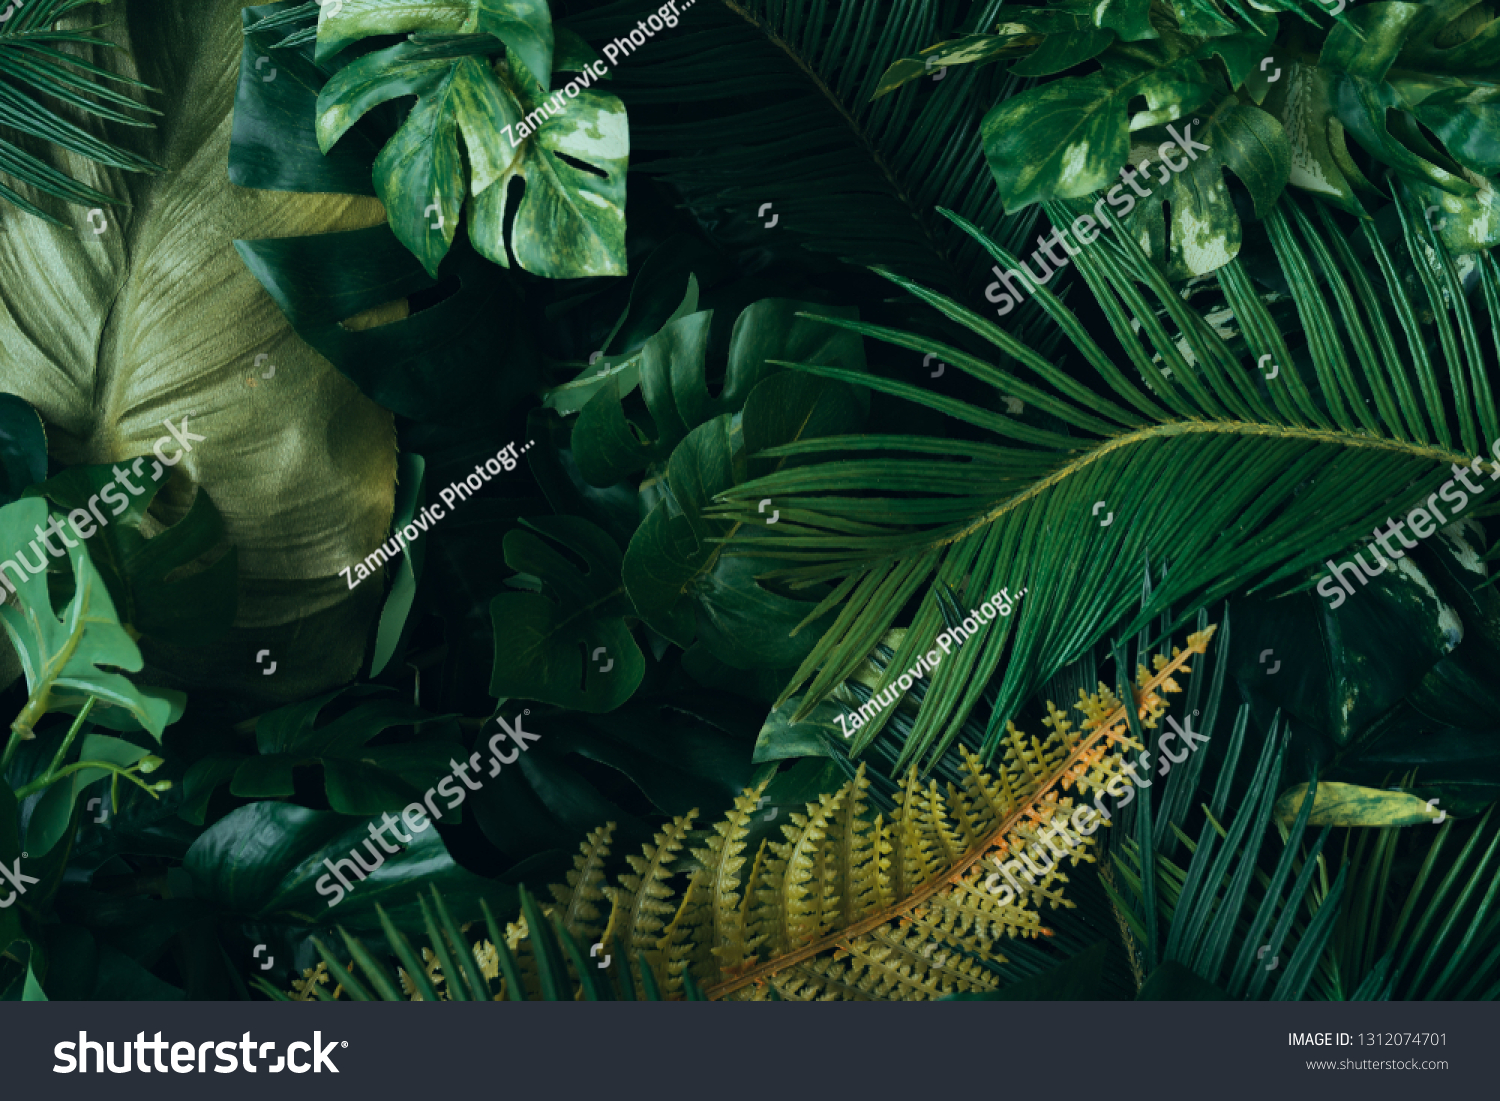 Creative layout made of tropical leaves. Flat lay. Nature concep #1312074701